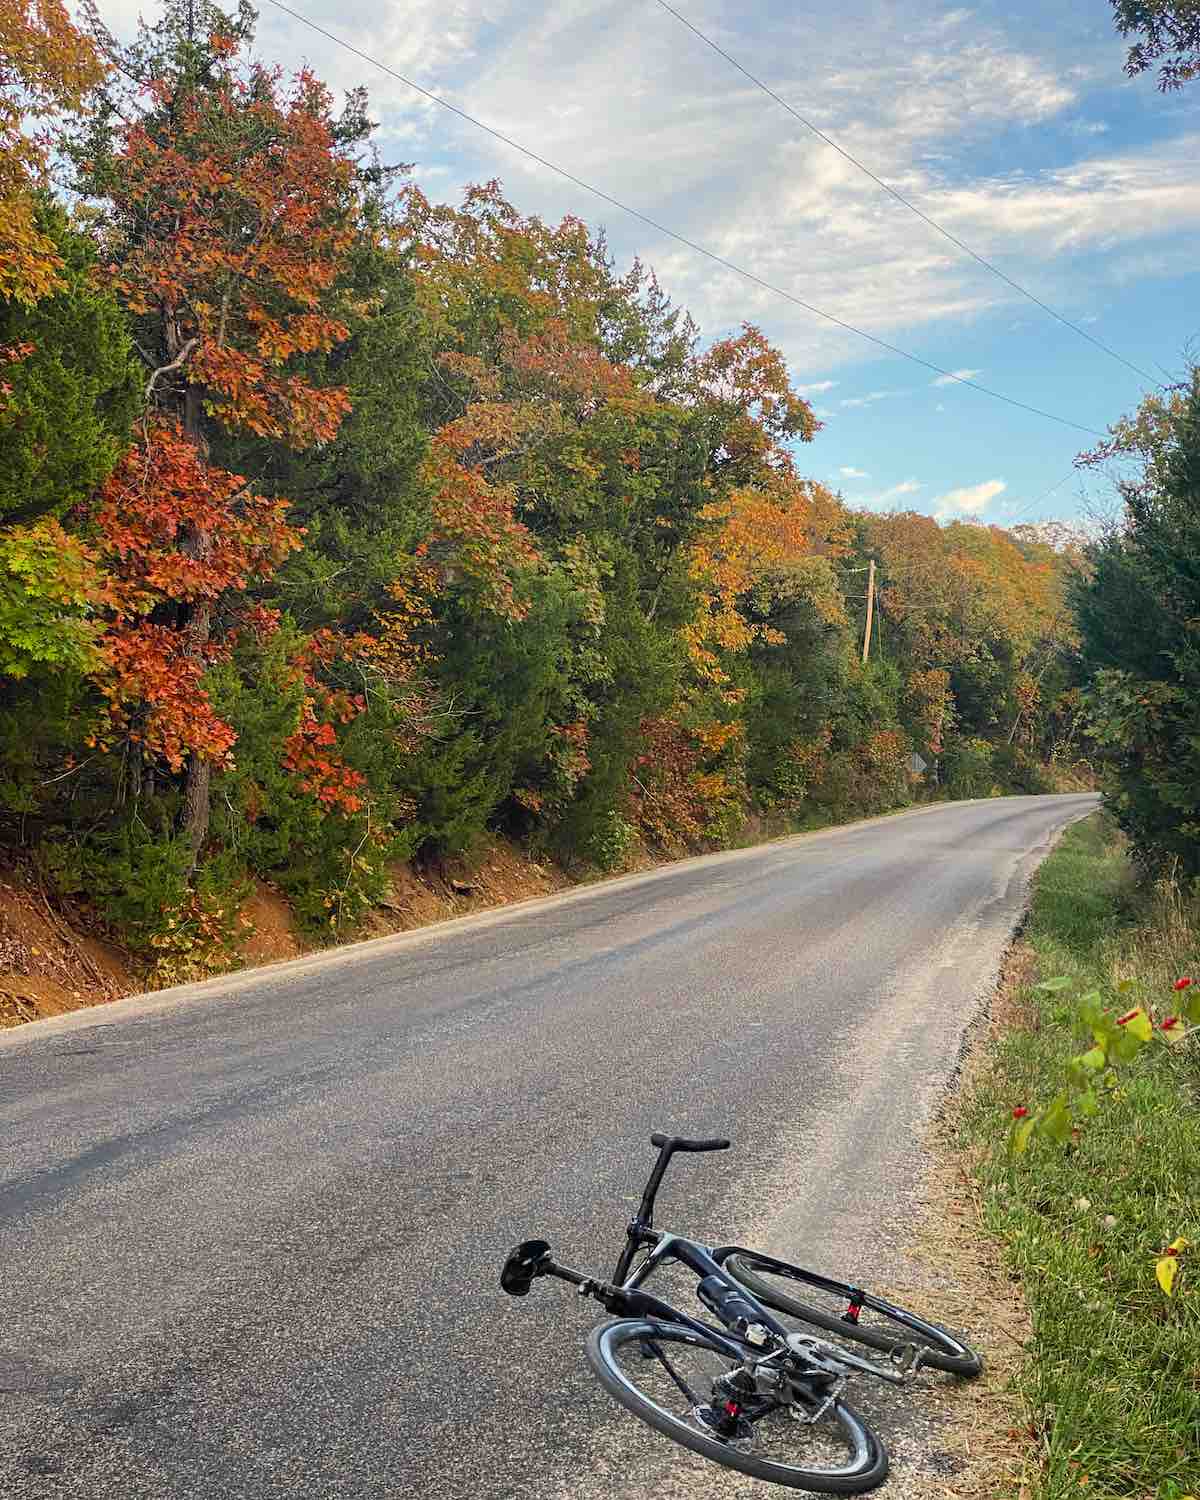 bikerumor pic of the day a road bike lays on its side by a road with trees in fall colors banking it, the sky is blue with white clouds